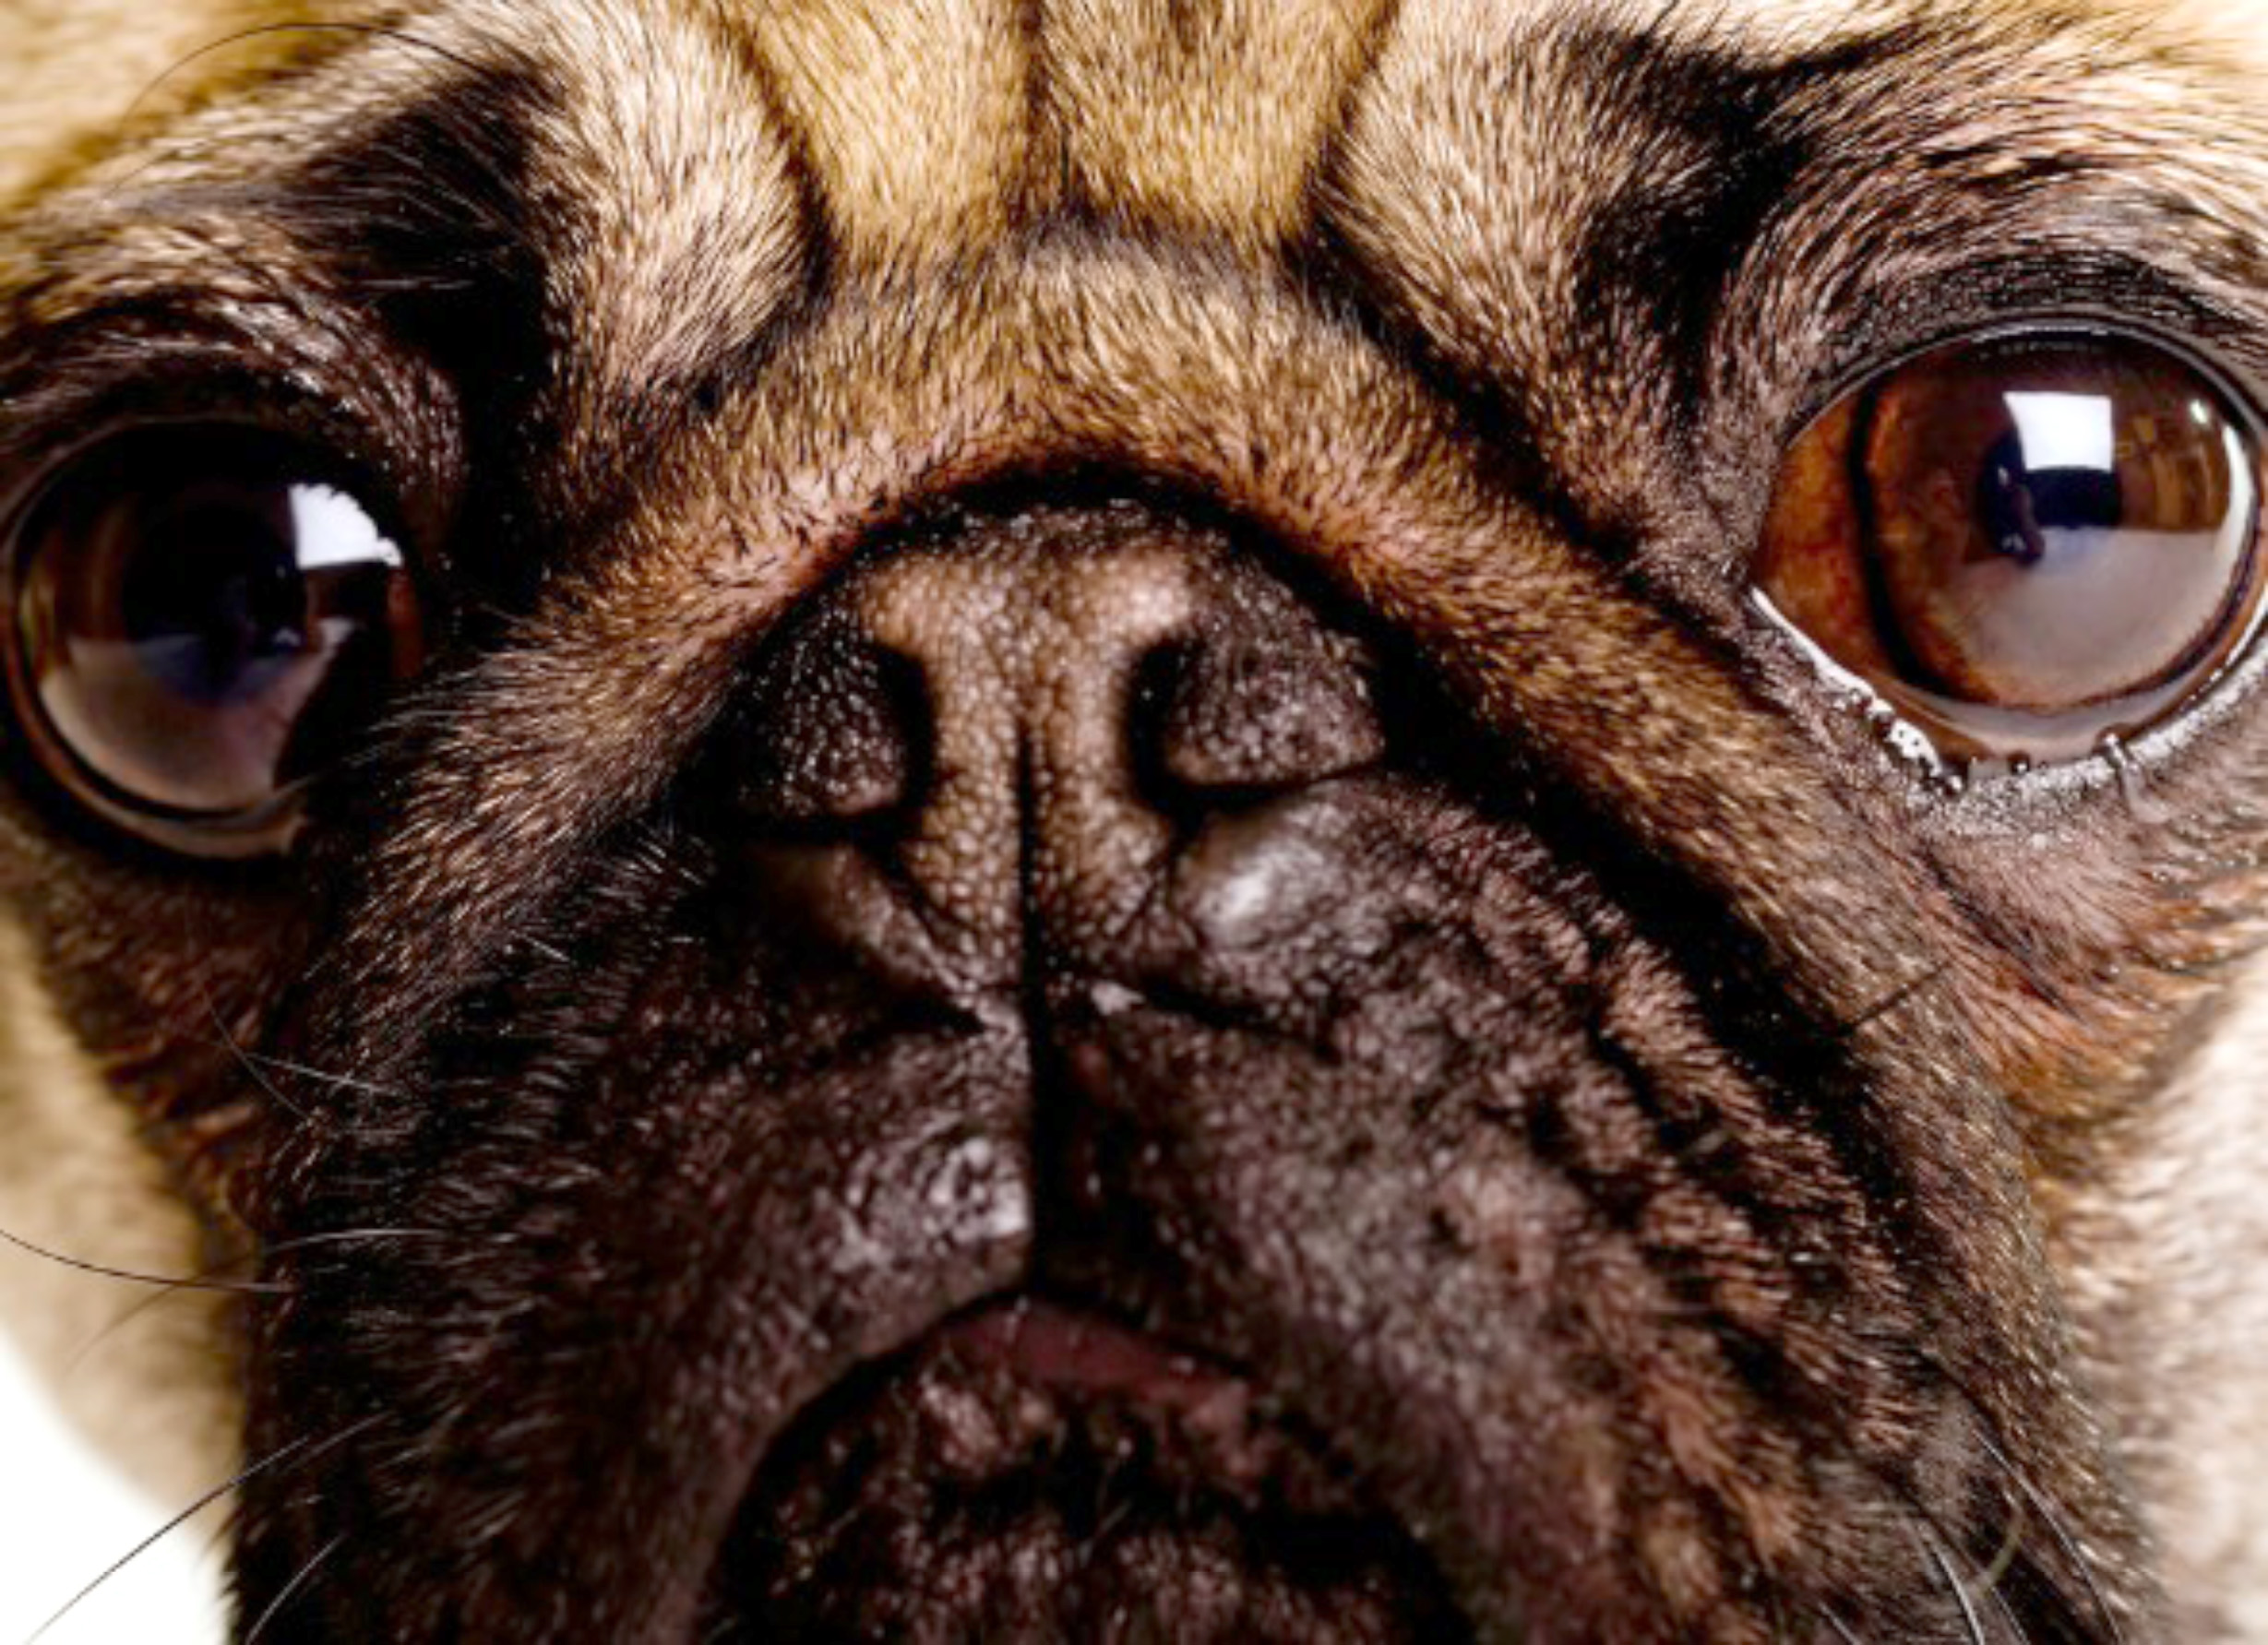 What is Anterior Uveitis?  Are Pugs Prone to get it?